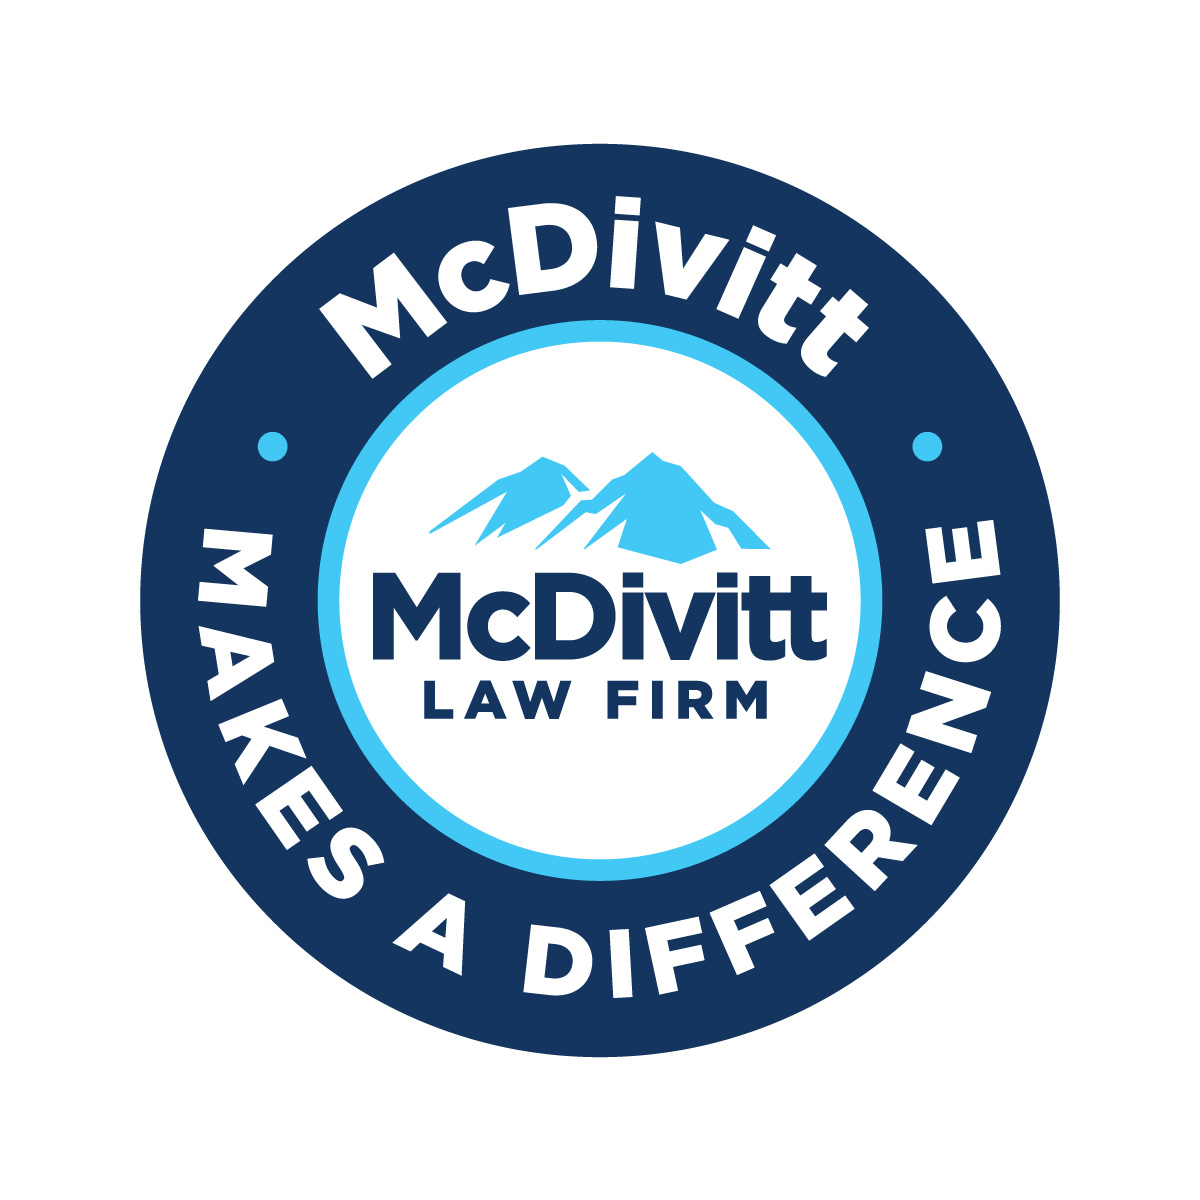 McDivitt Makes a Difference